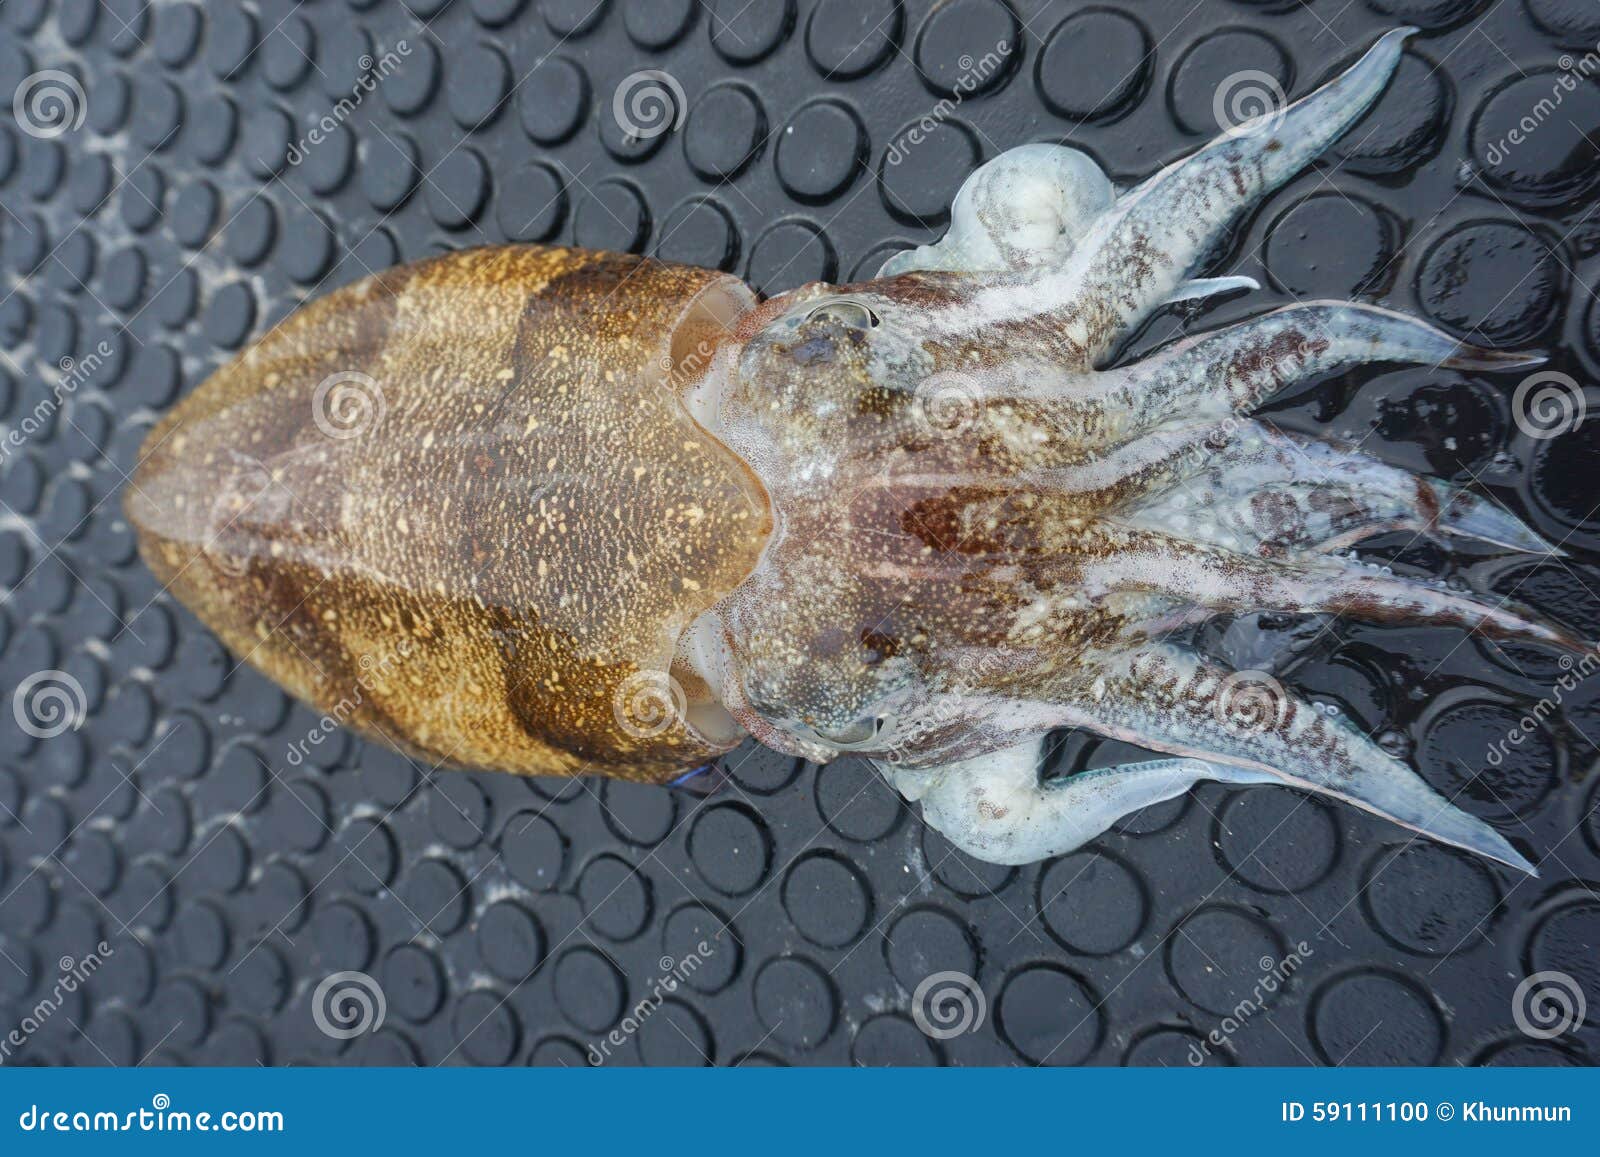 Squid stock photo. Image of ingredient, cool, color, kitchen - 59111100